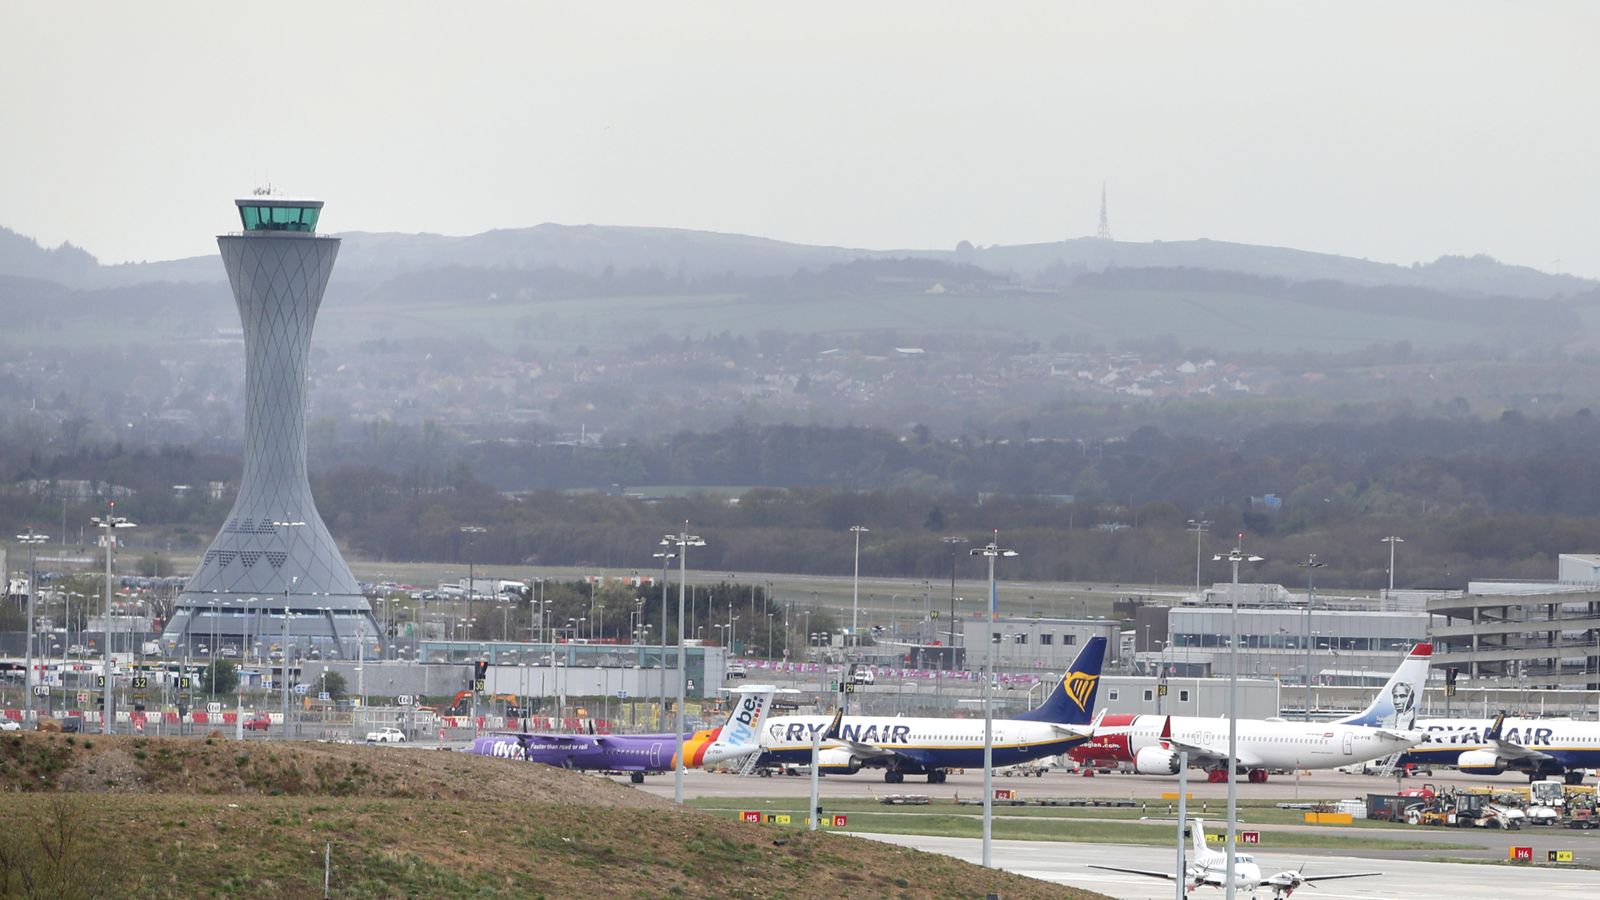 Flights to and from Edinburgh Airport temporarily suspended due to emergency runway repairs